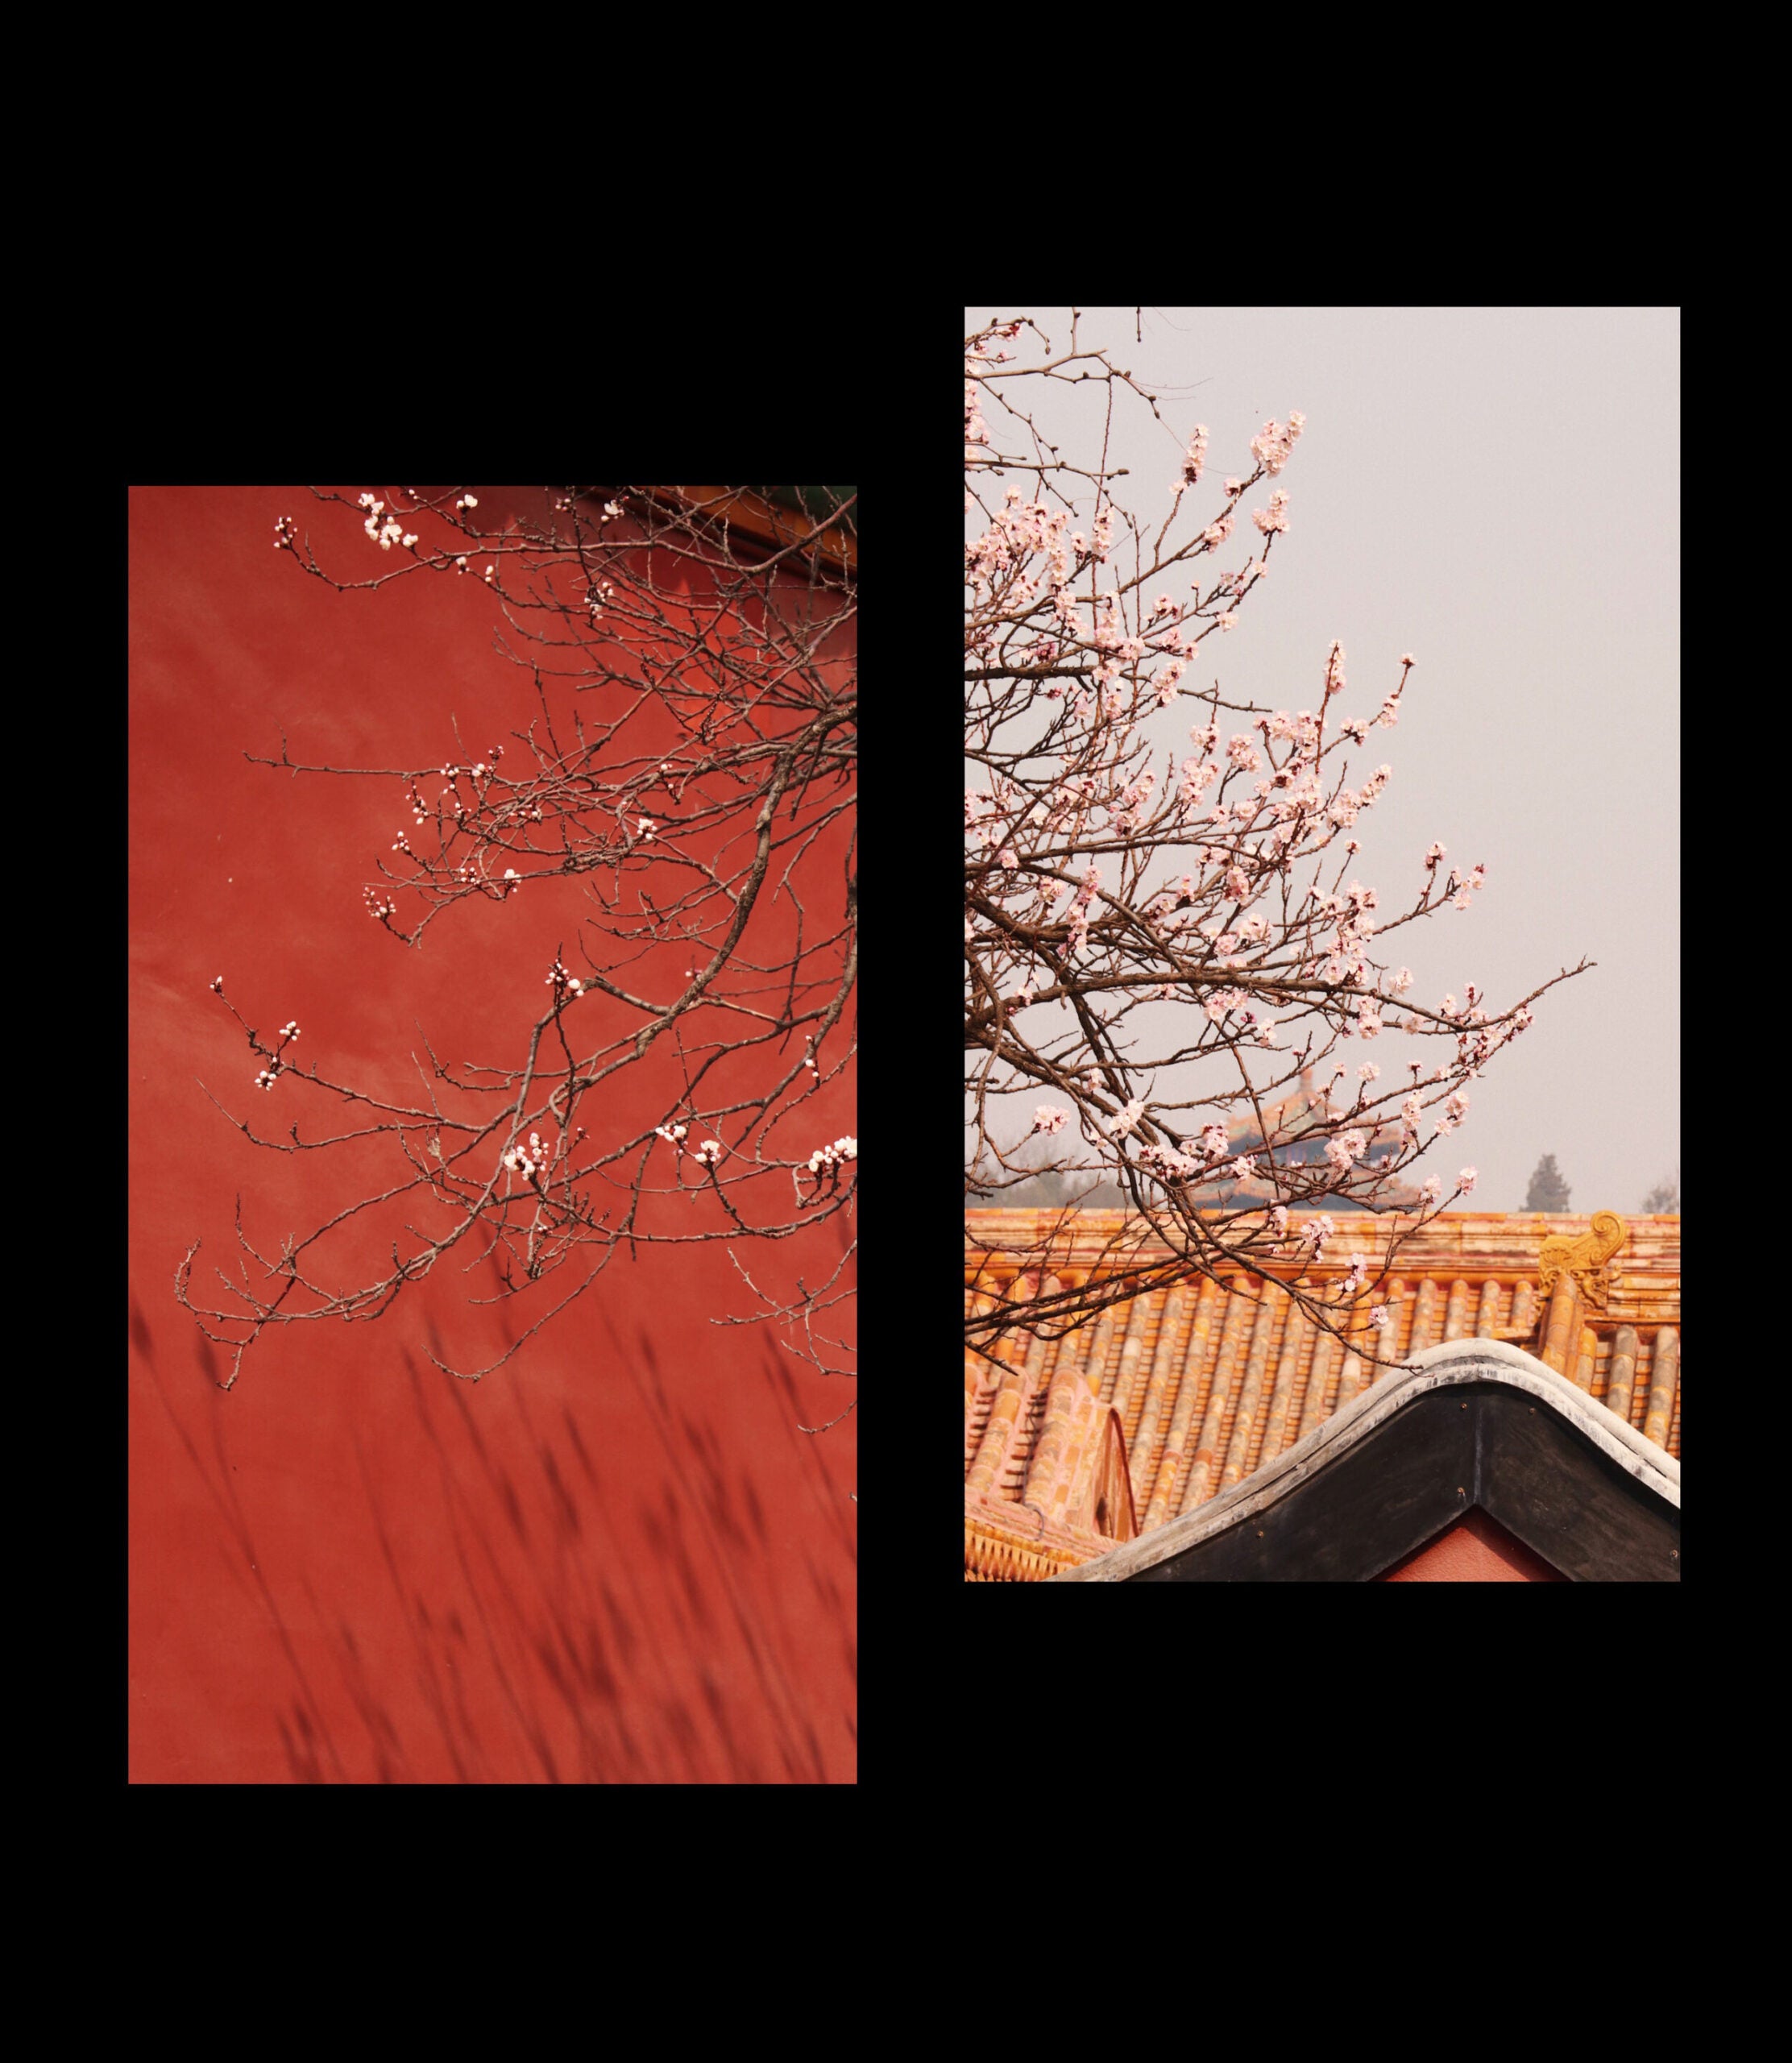 Cherry blossom tree in two panels. The left depicts cherry blossom branches against a red background; the right shows the branches and a tile roof.